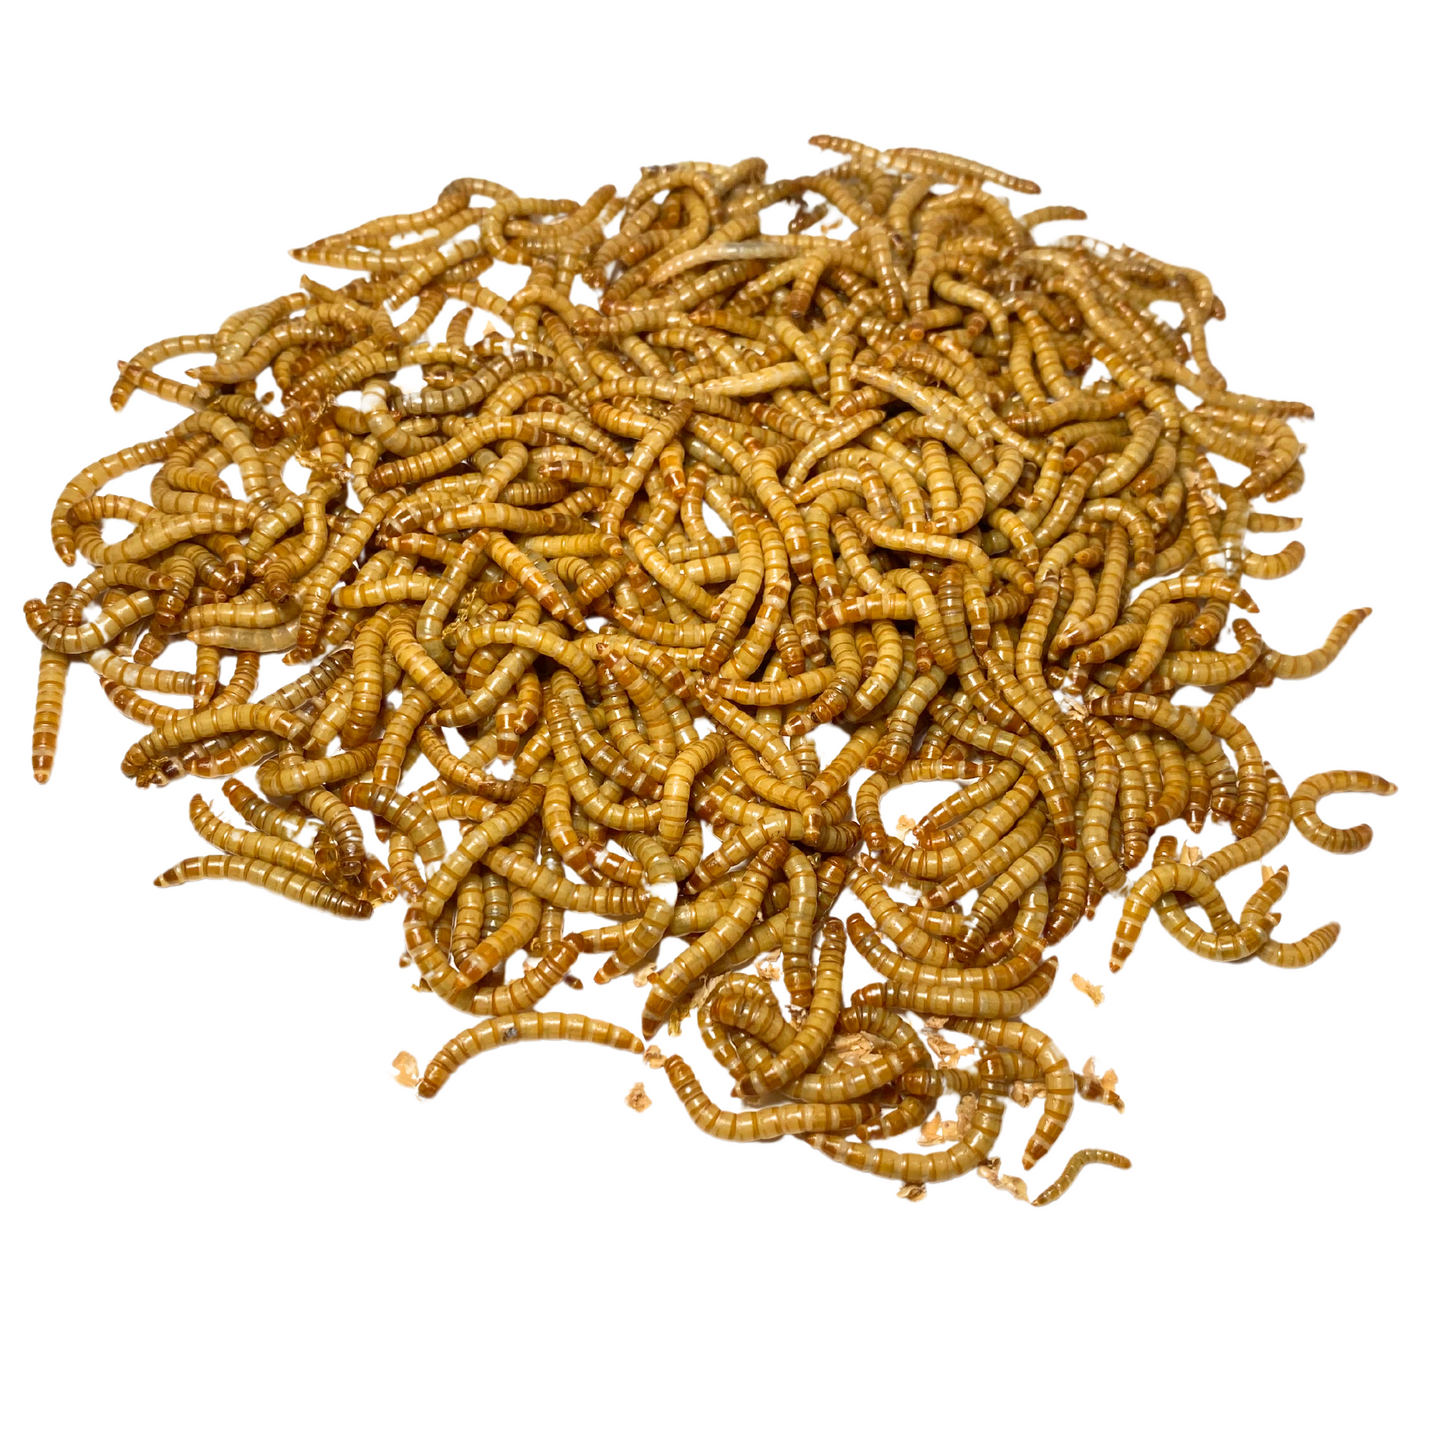 500 Live Mealworms